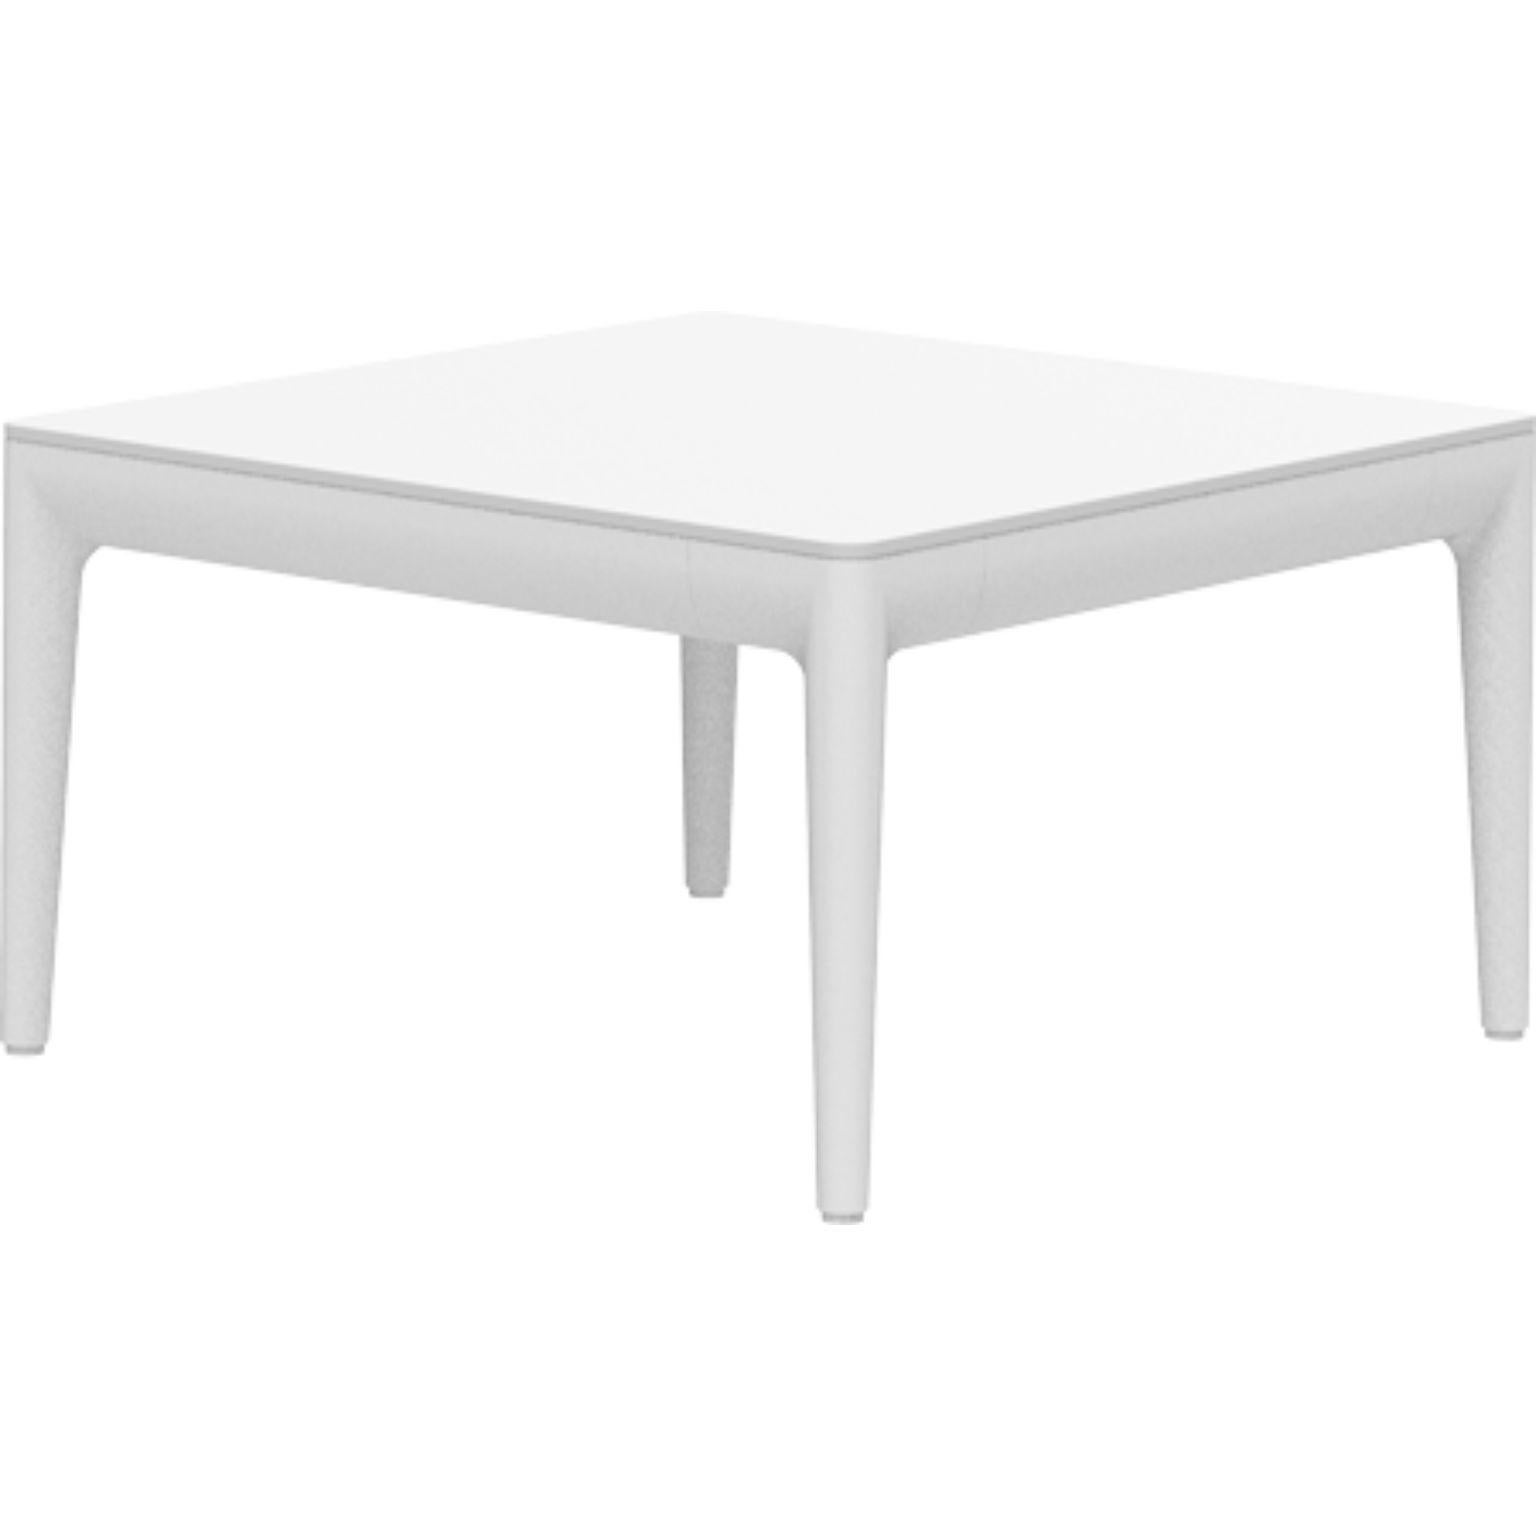 Ribbons white 50 coffee table by MOWEE
Dimensions: D 50 x W 50 x H 29 cm
Material: Aluminum and HPL top.
Weight: 8 kg.
Also available in different colors and finishes. (HPL Black Edge or Neolith top).

An unmistakable collection for its beauty